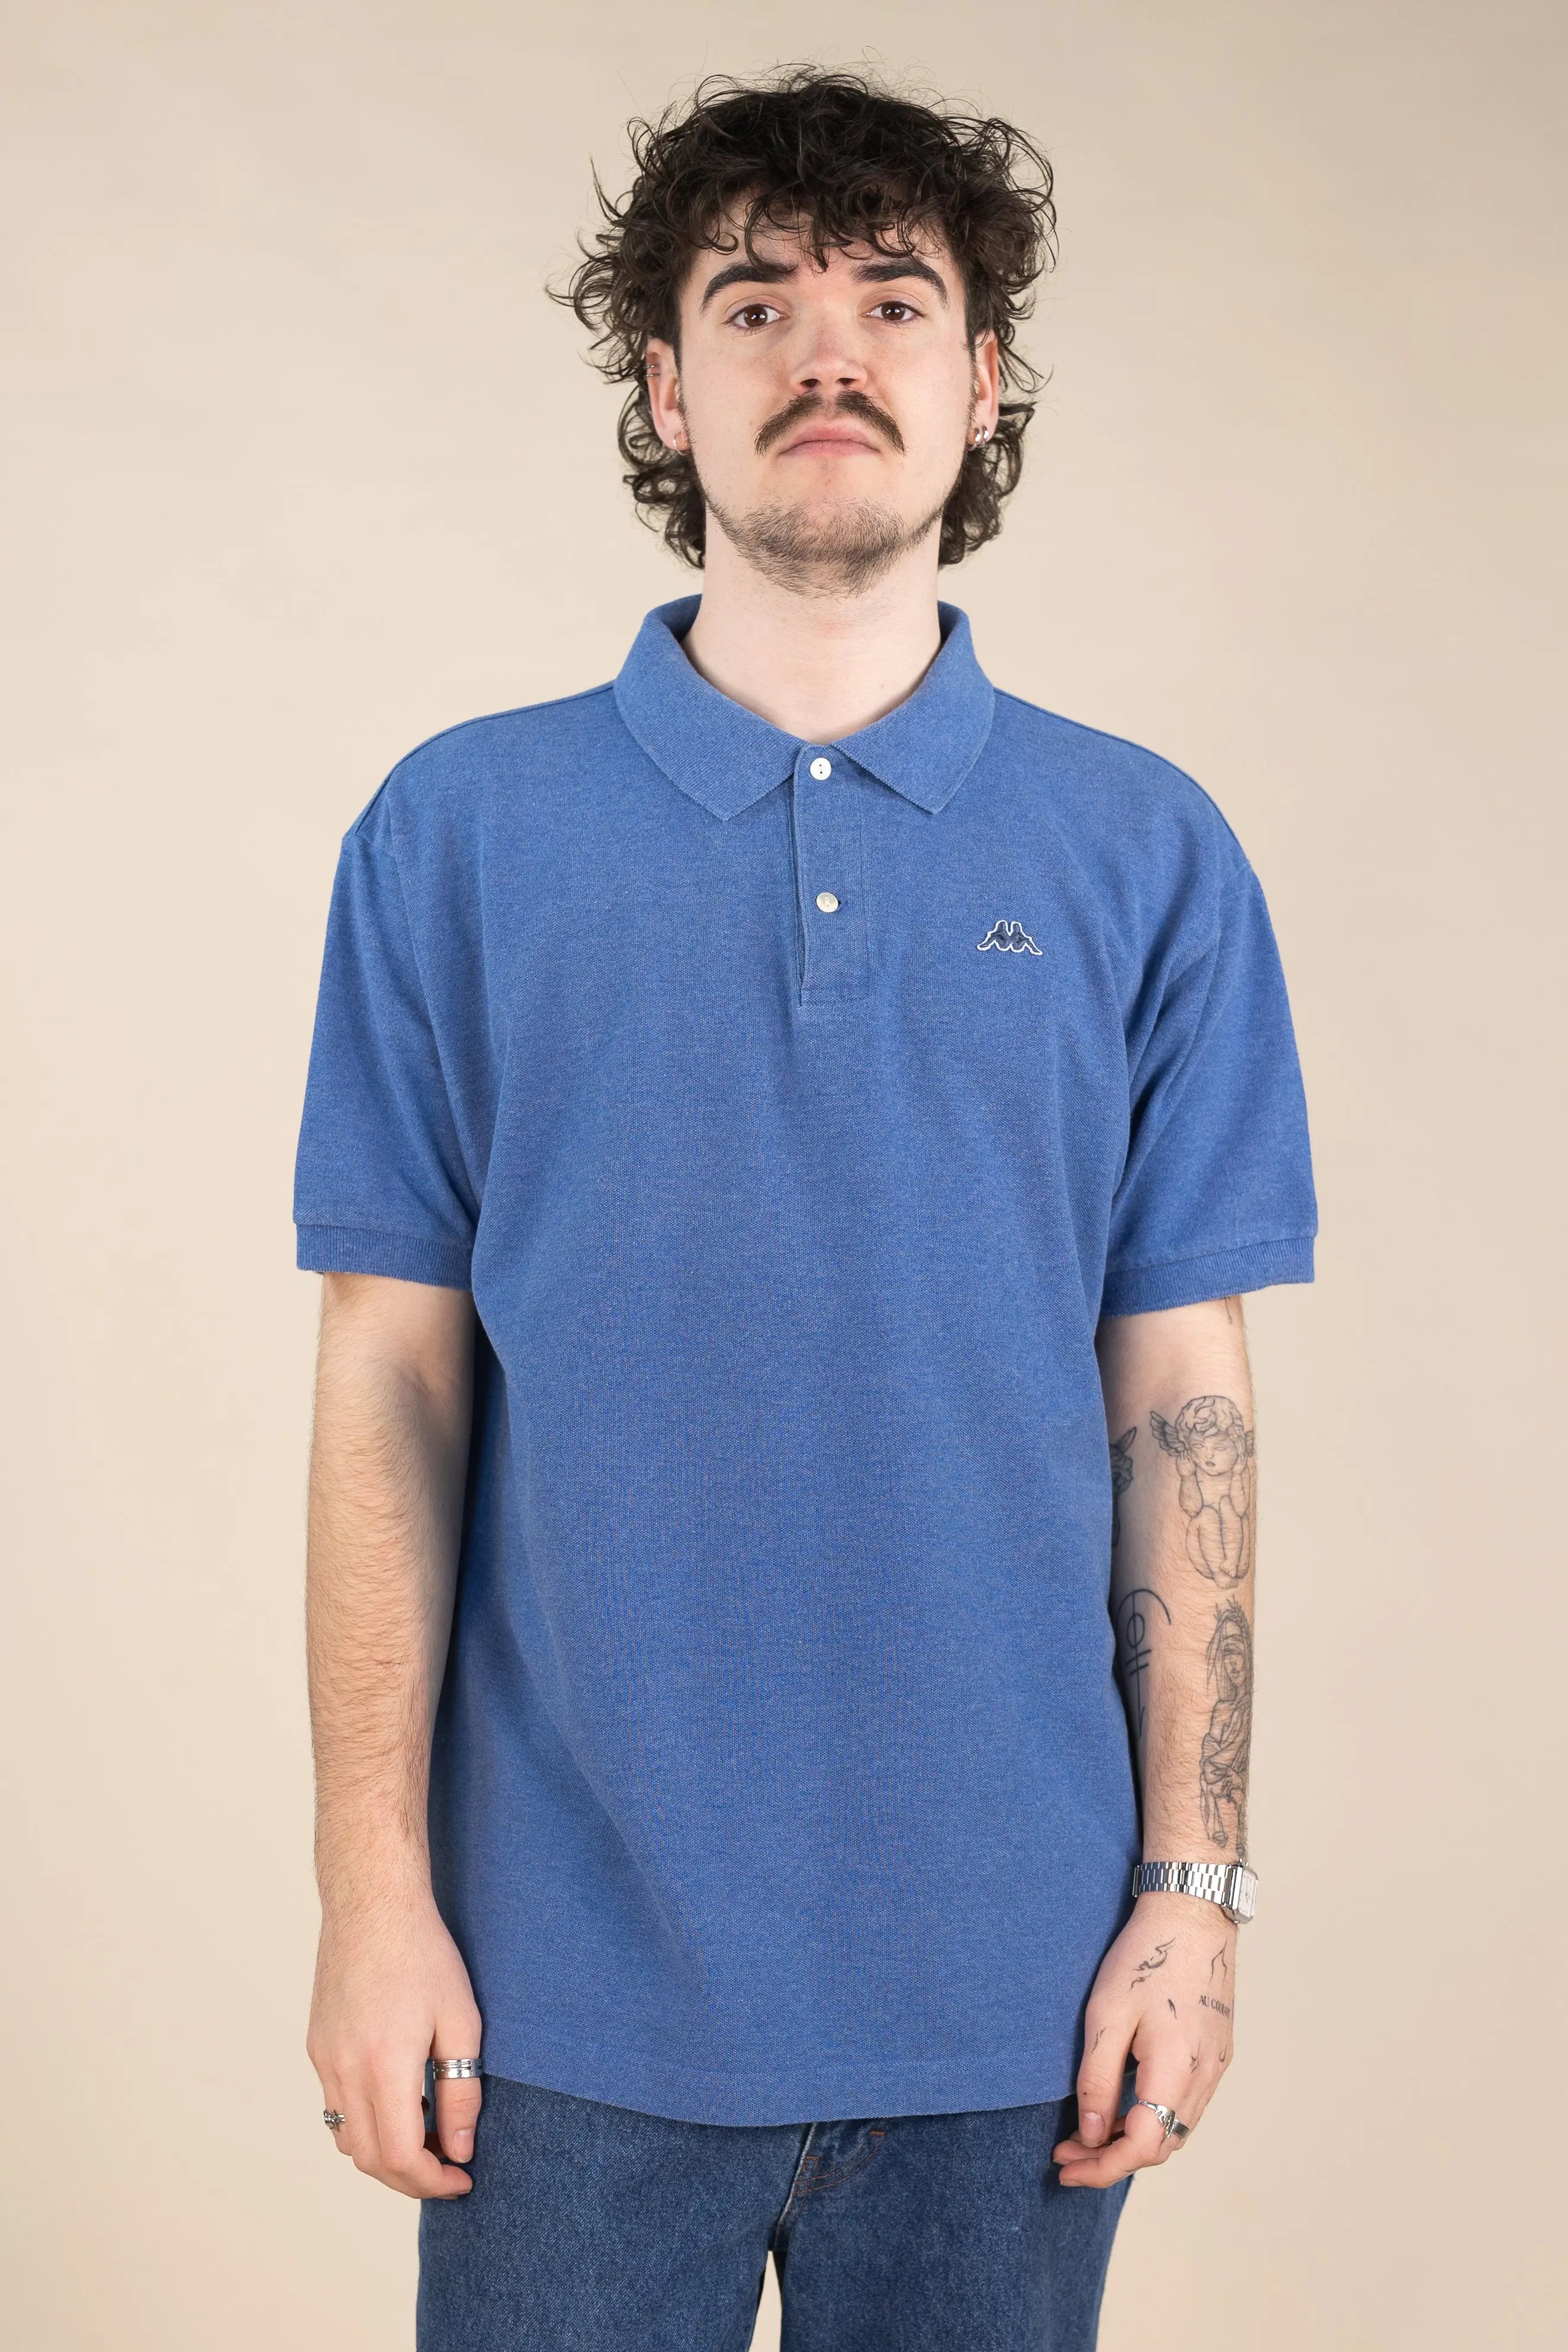 Robe di Kappa - Polo Shirt- ThriftTale.com - Vintage and second handclothing